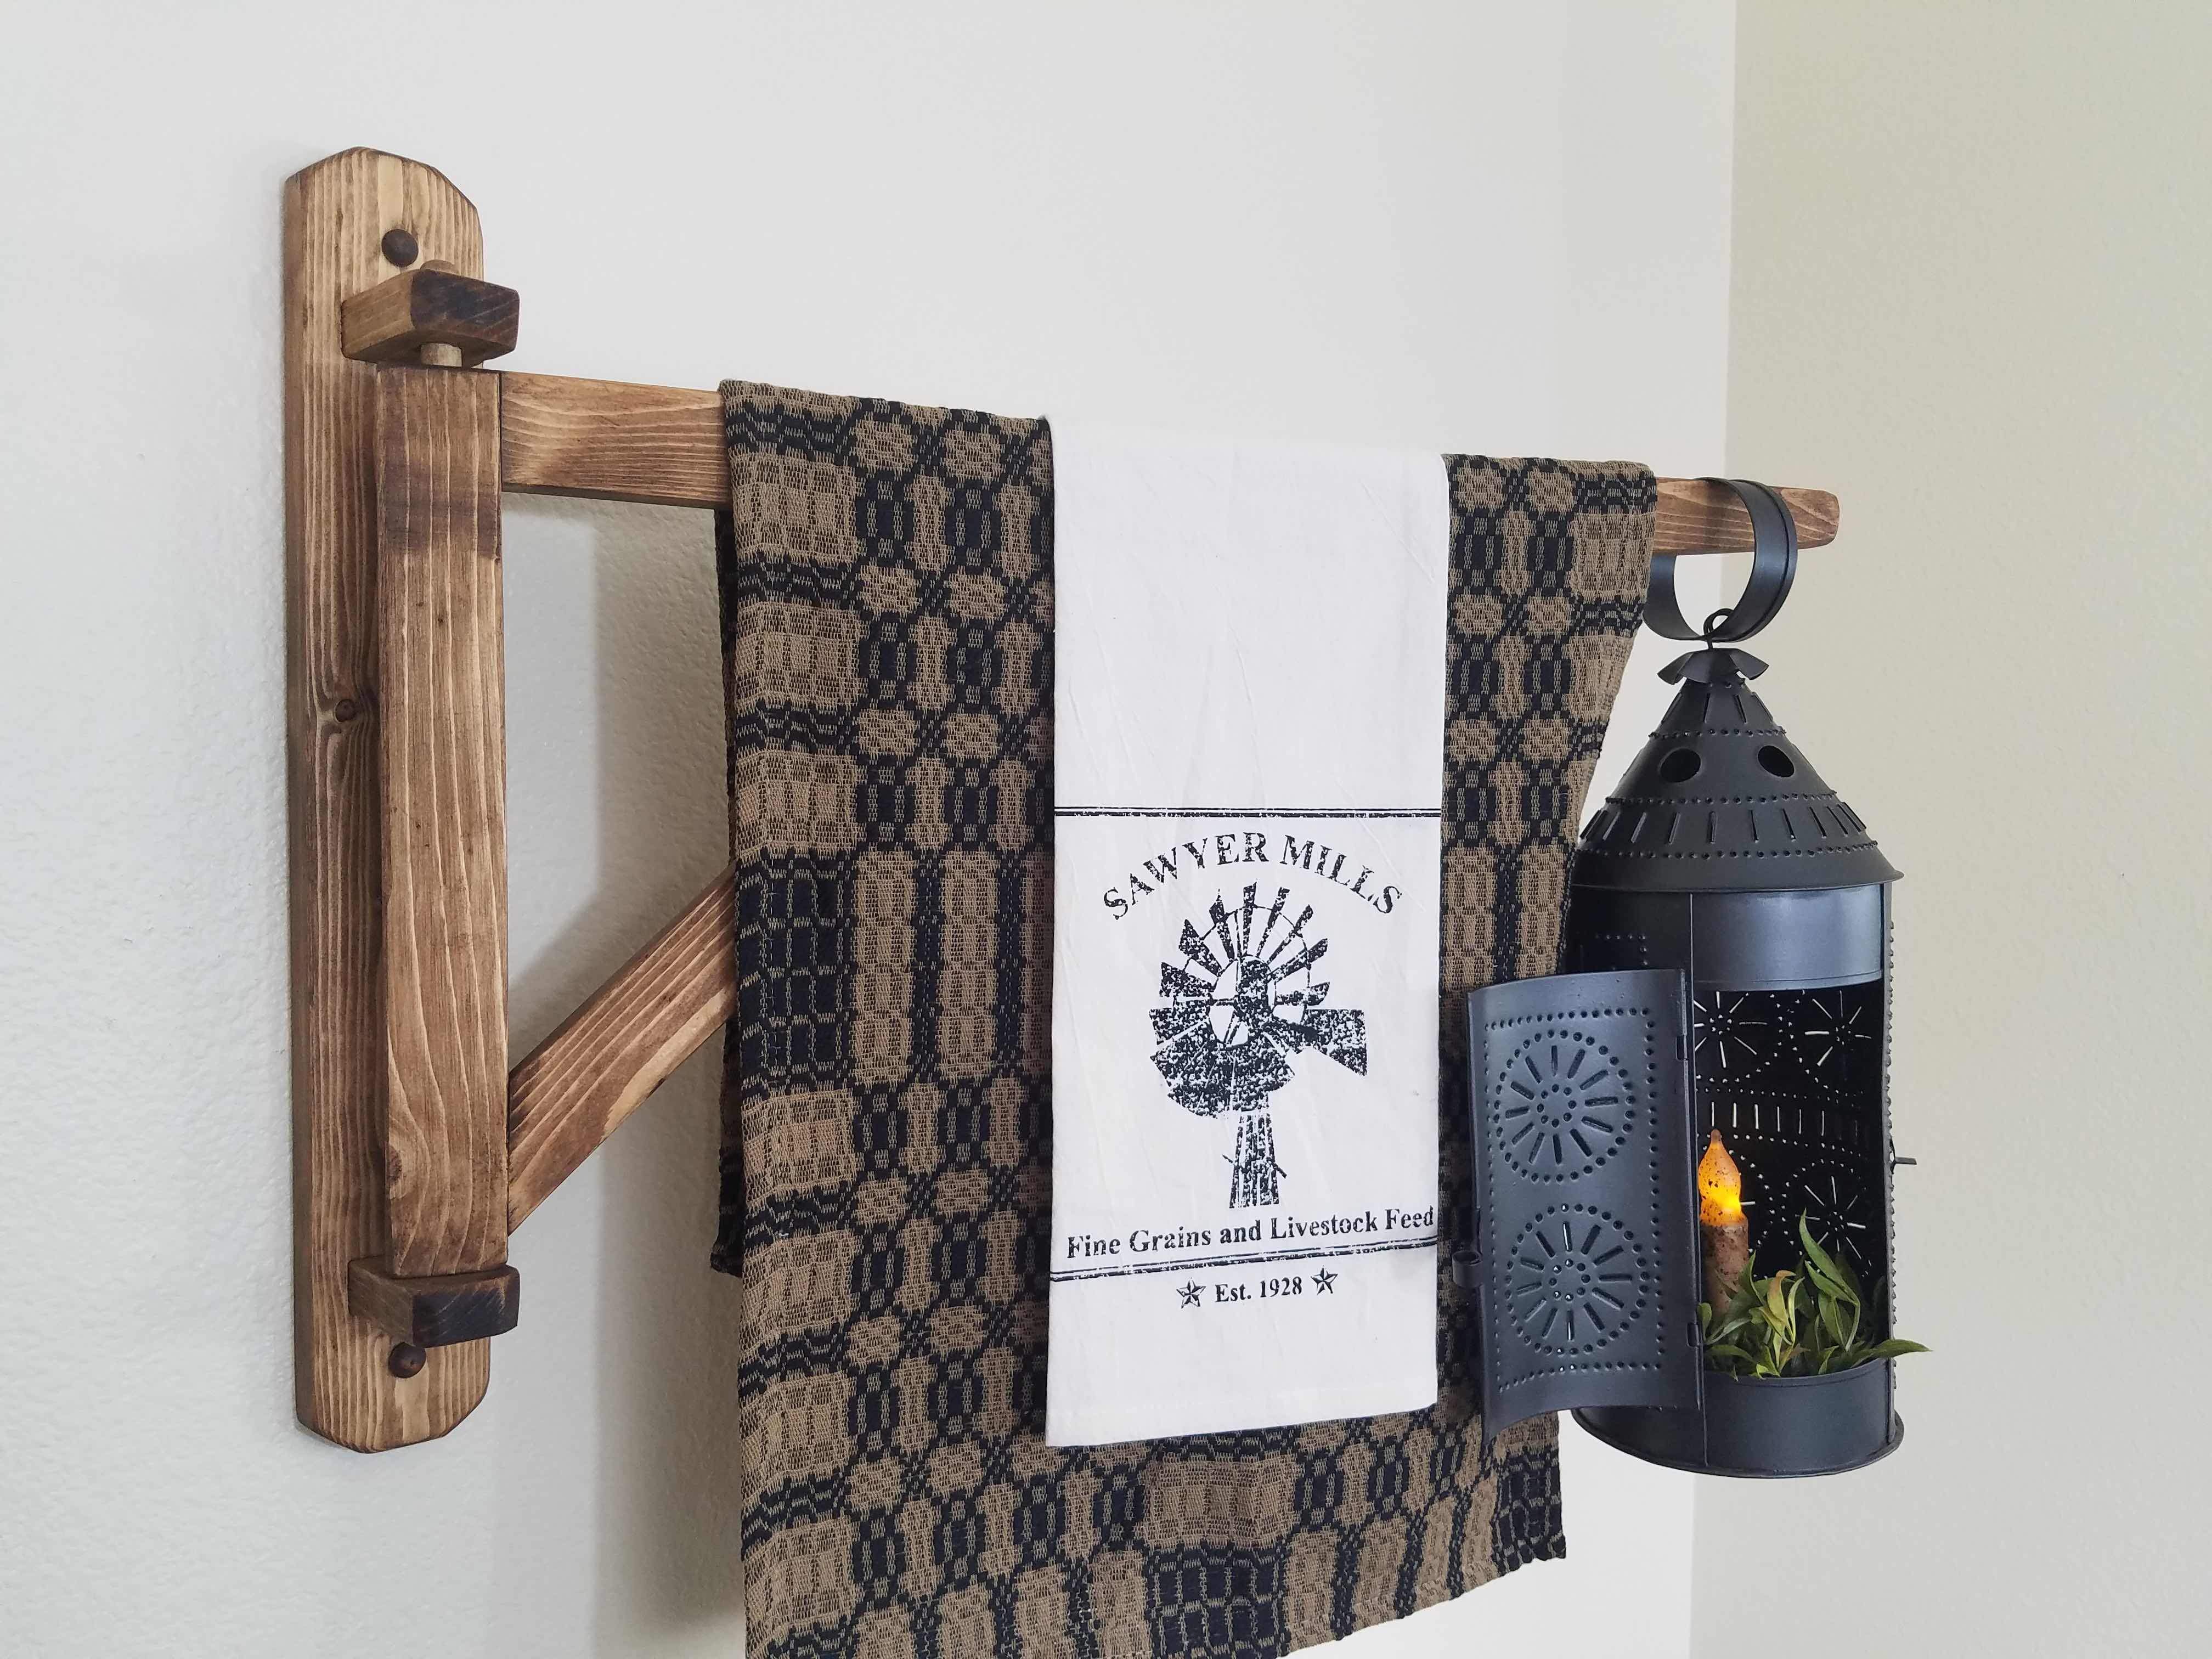 Wooden Blanket Holder Hanger How to Hang A Pendleton Blanket on the Wall 